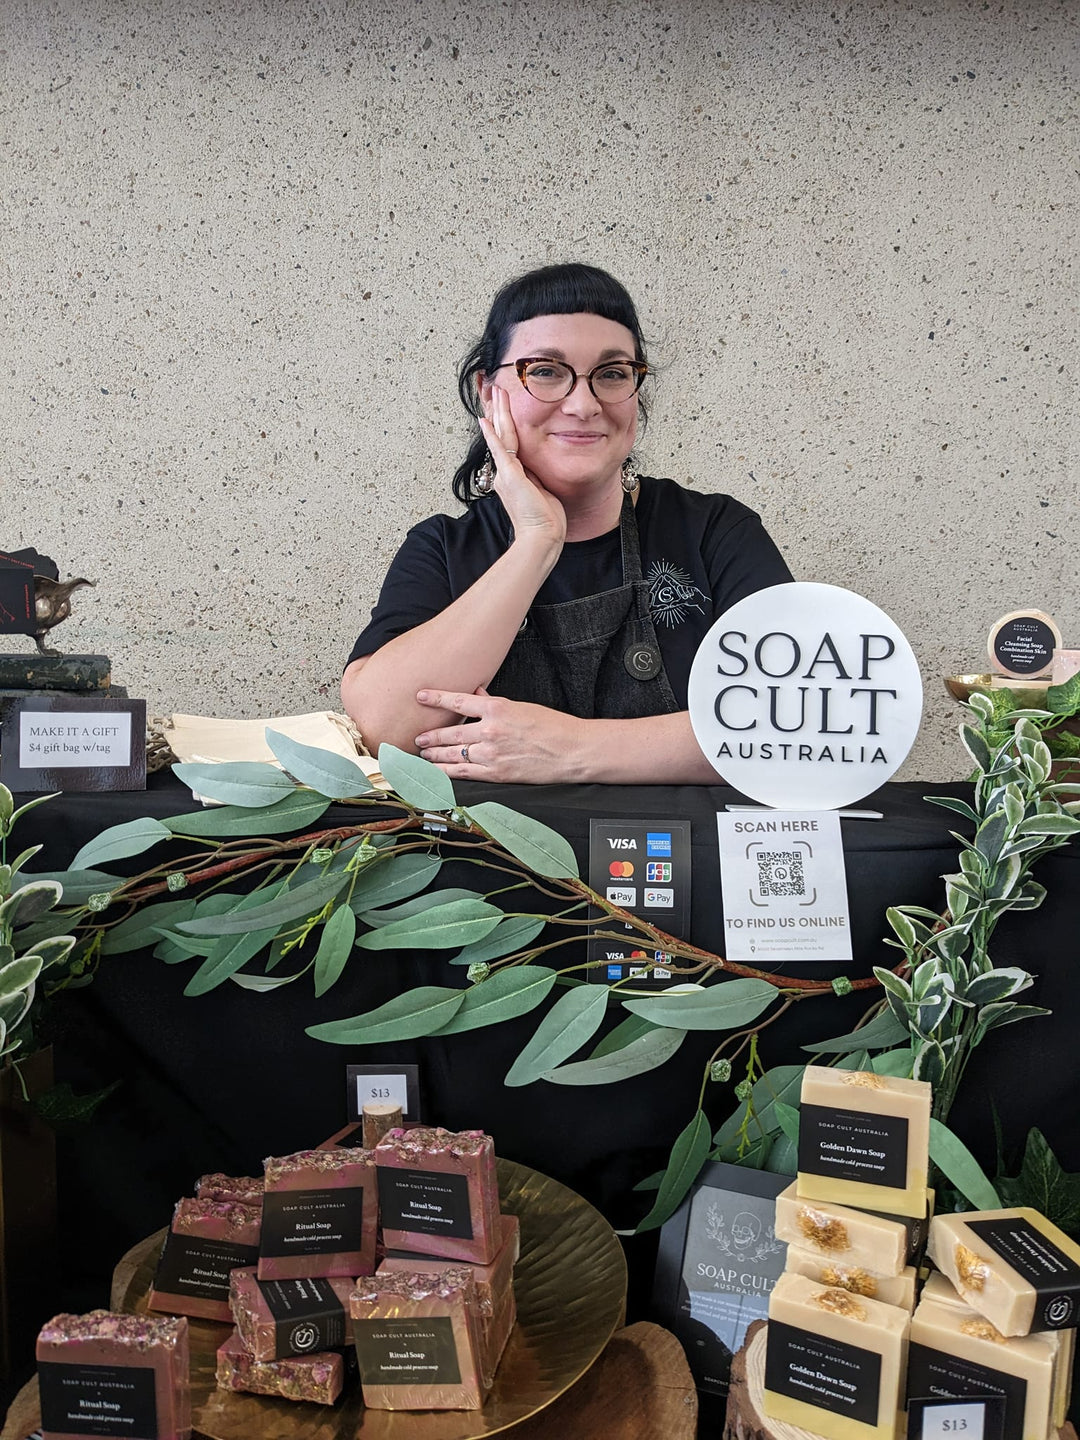 Find us at the Handmade Markets with BrisStyle - Soap Cult Australia